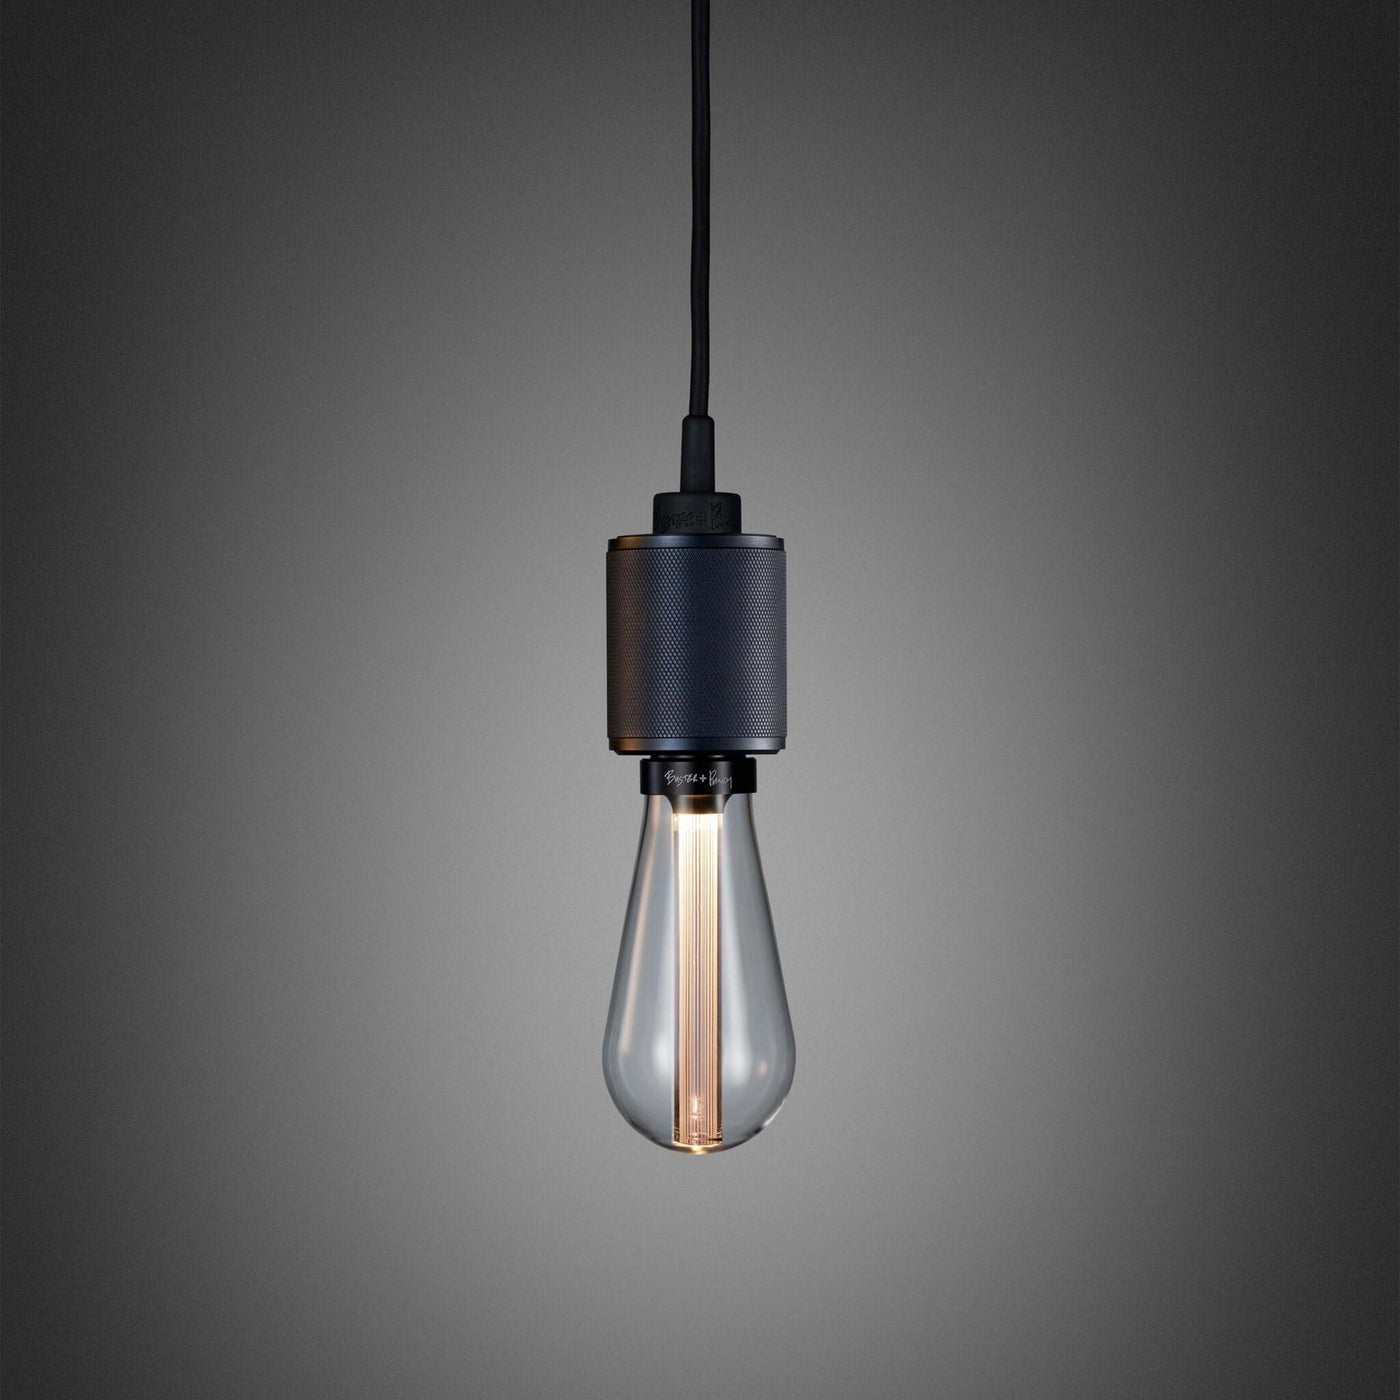 Buster + Punch Heavy Metal Light Pendant